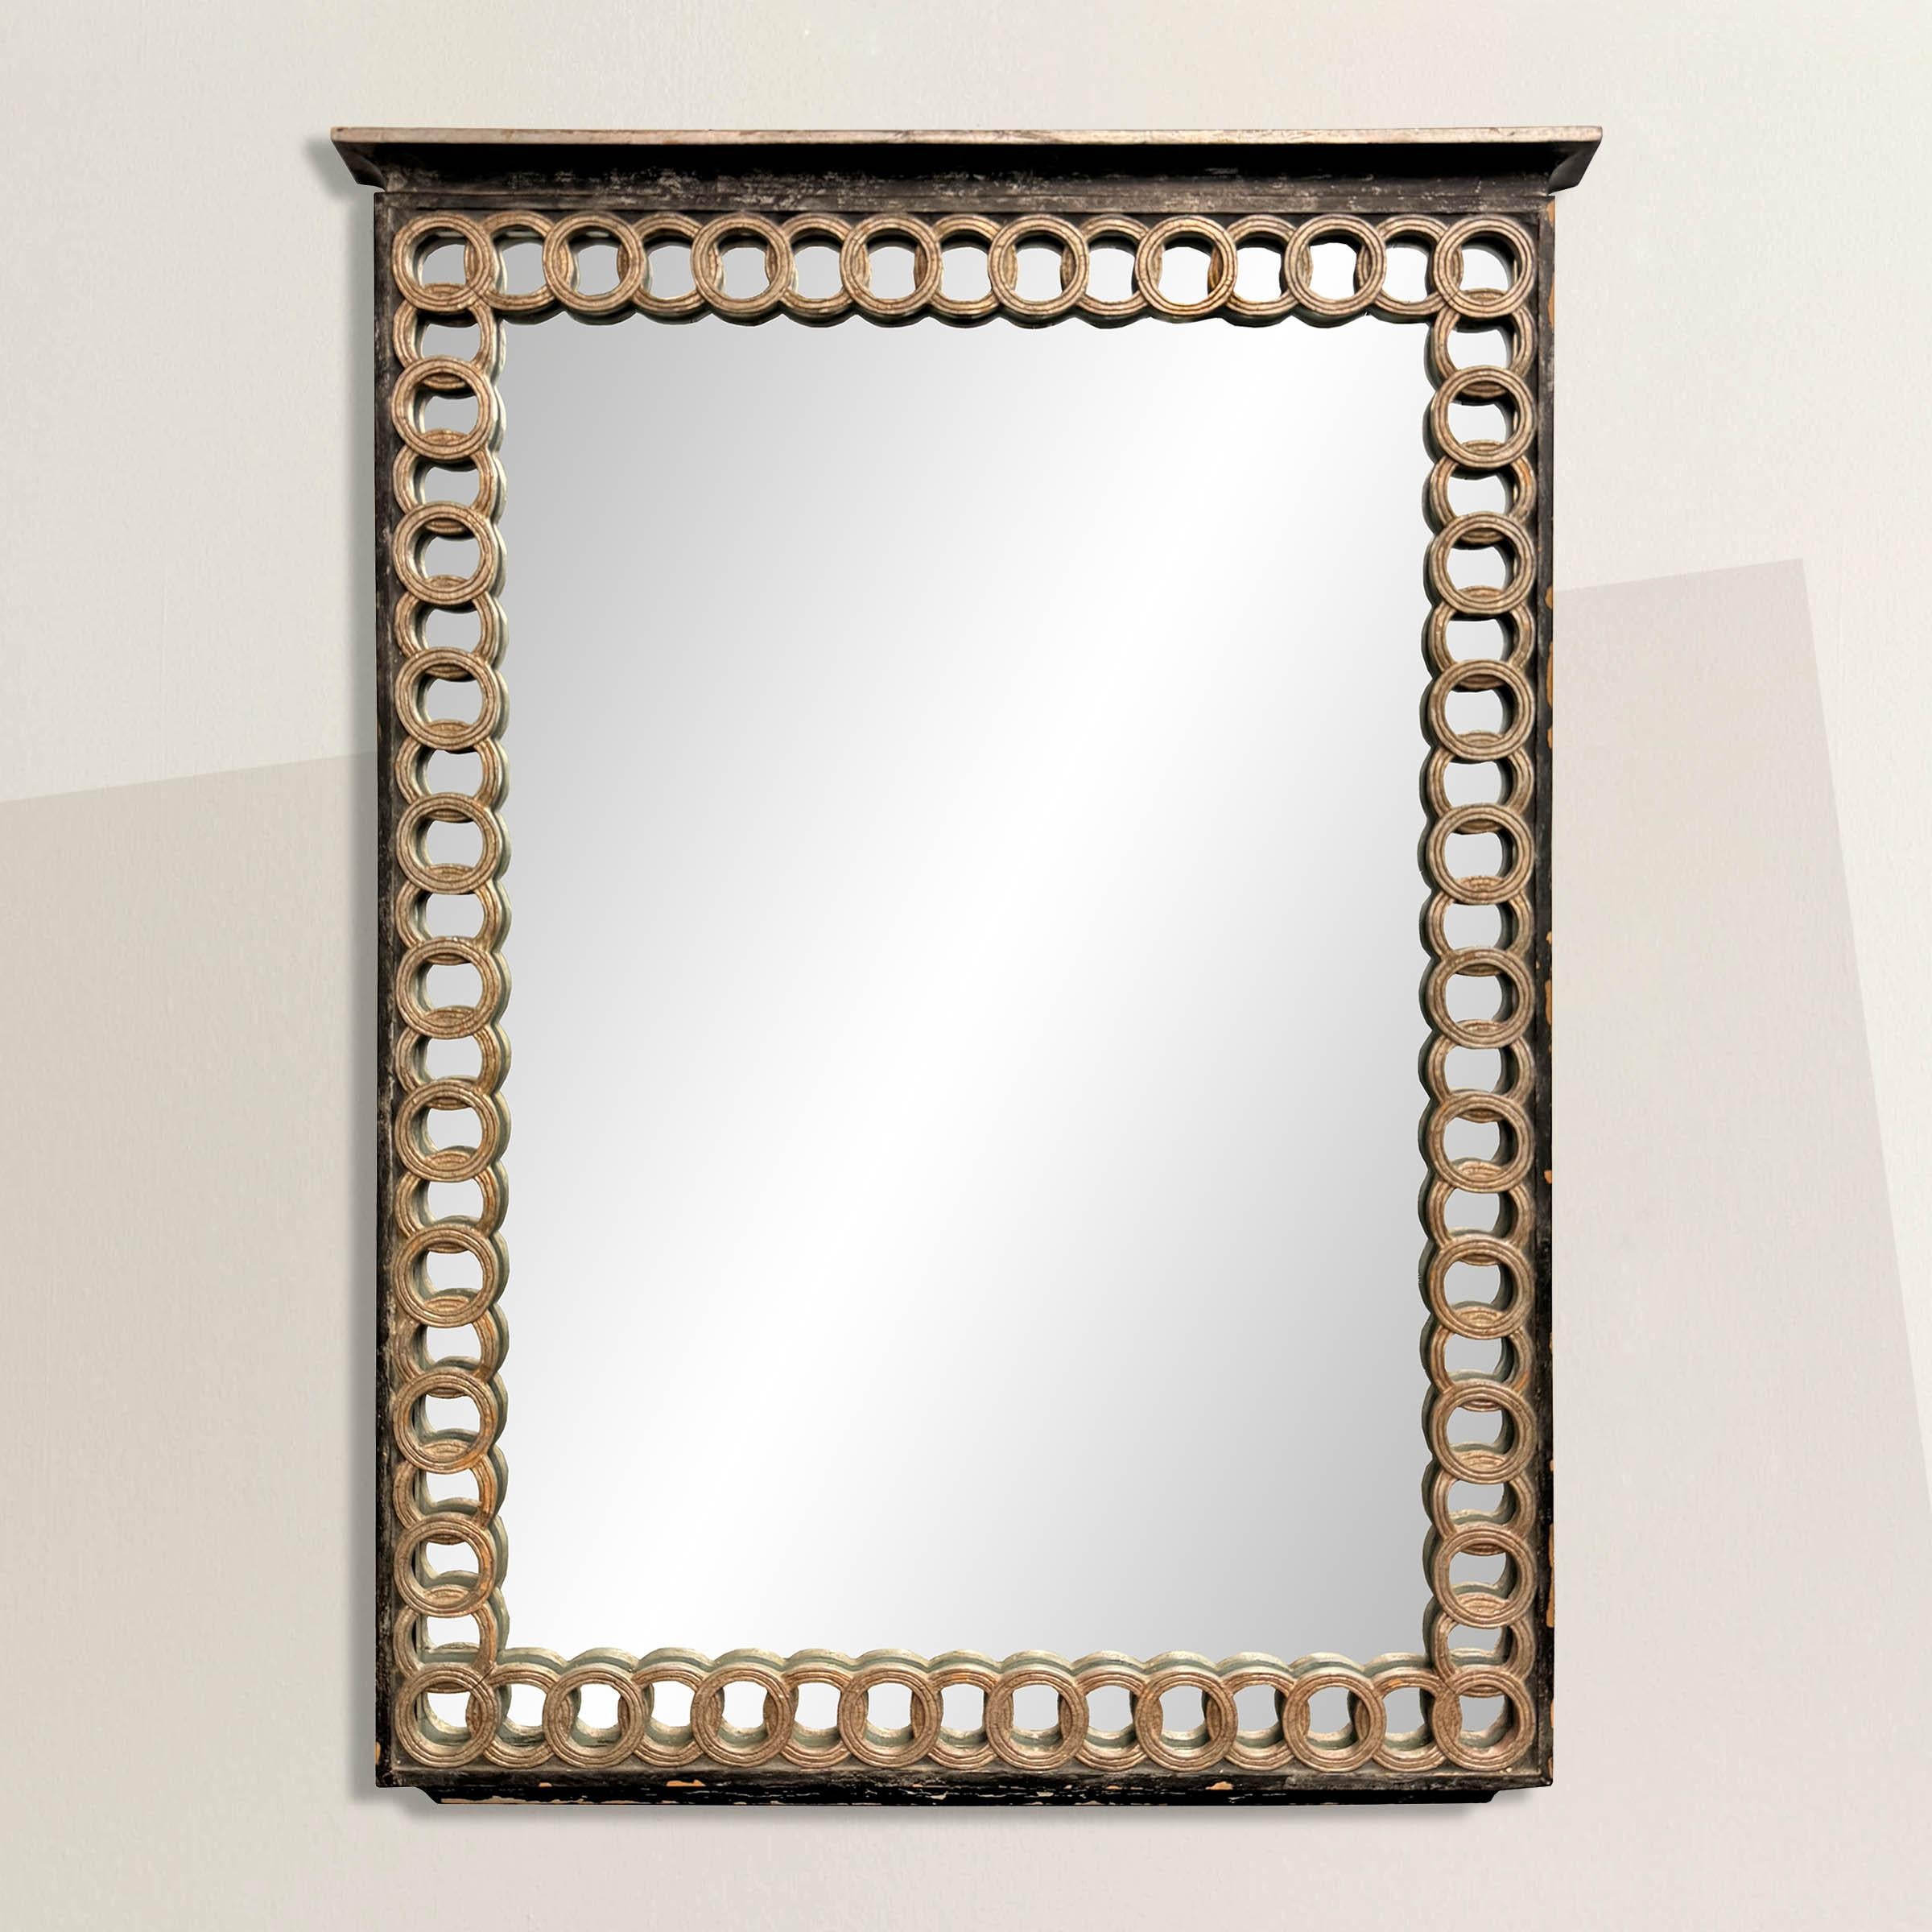 This incredible mid-20th century Italian mirror boasts a subtly architectural frame. Crafted with a nod to classical elegance yet infused with a touch of Italian modernity, its design is a testament to timeless sophistication. The frame features a